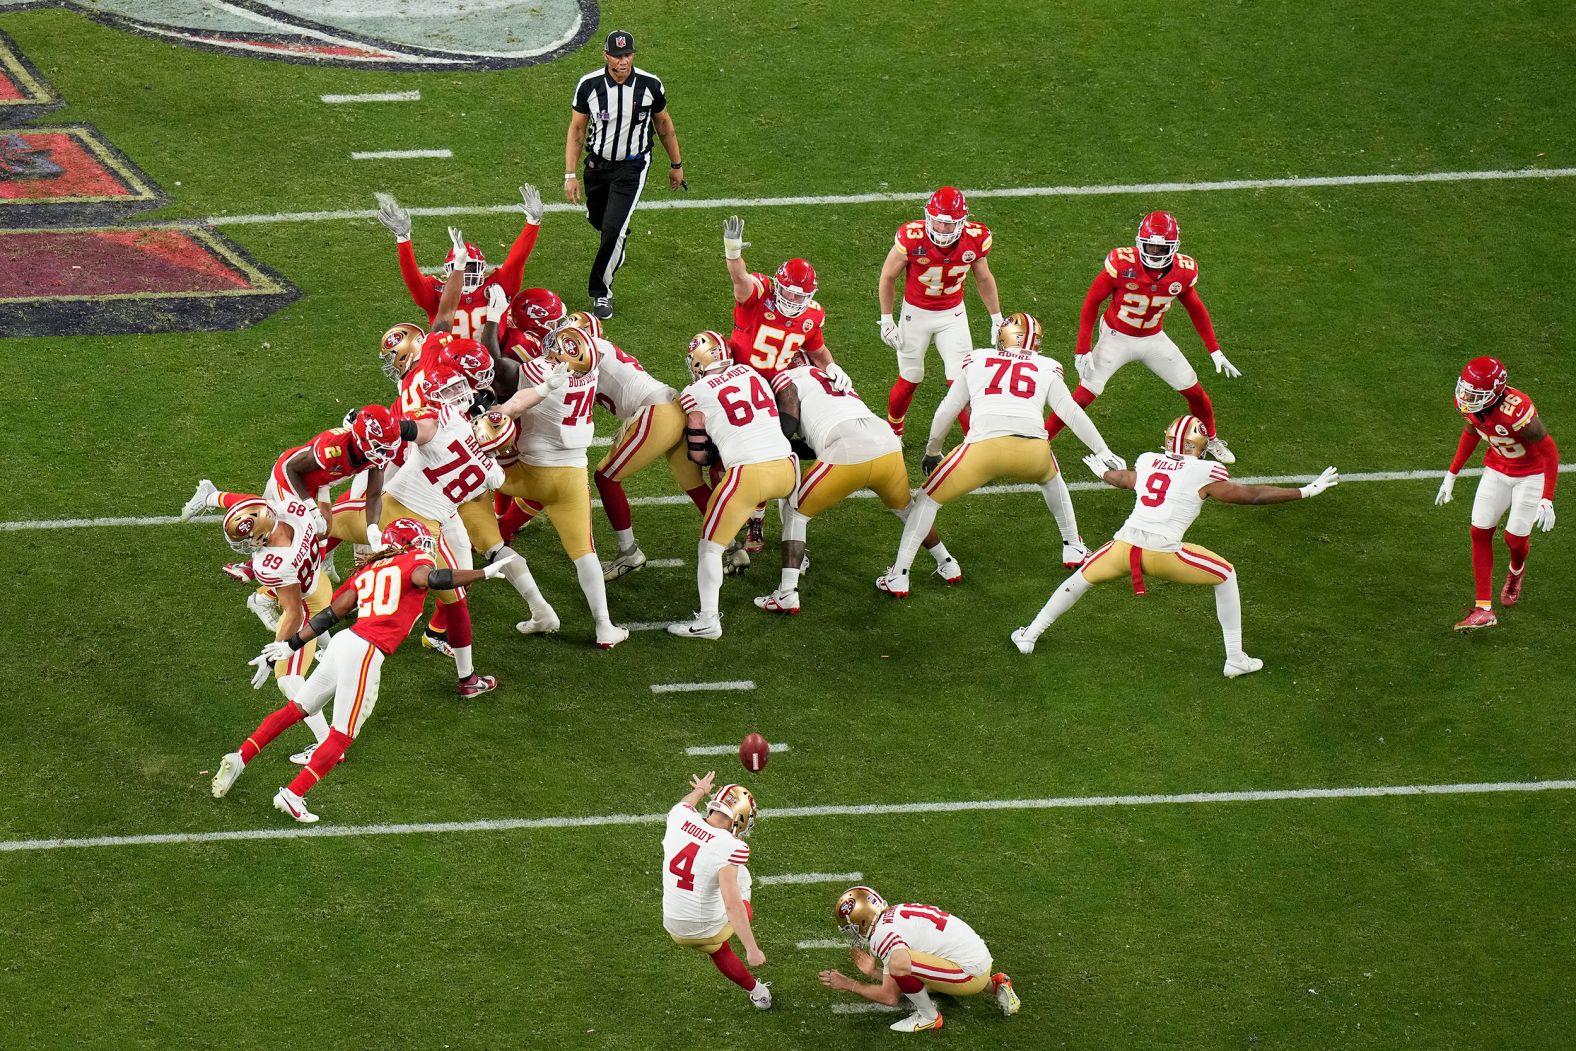 Moody kicks a 53-yard field goal late in the fourth quarter to give his team a 19-16 lead. Chiefs kicker Harrison Butker would tie the game with three seconds left.